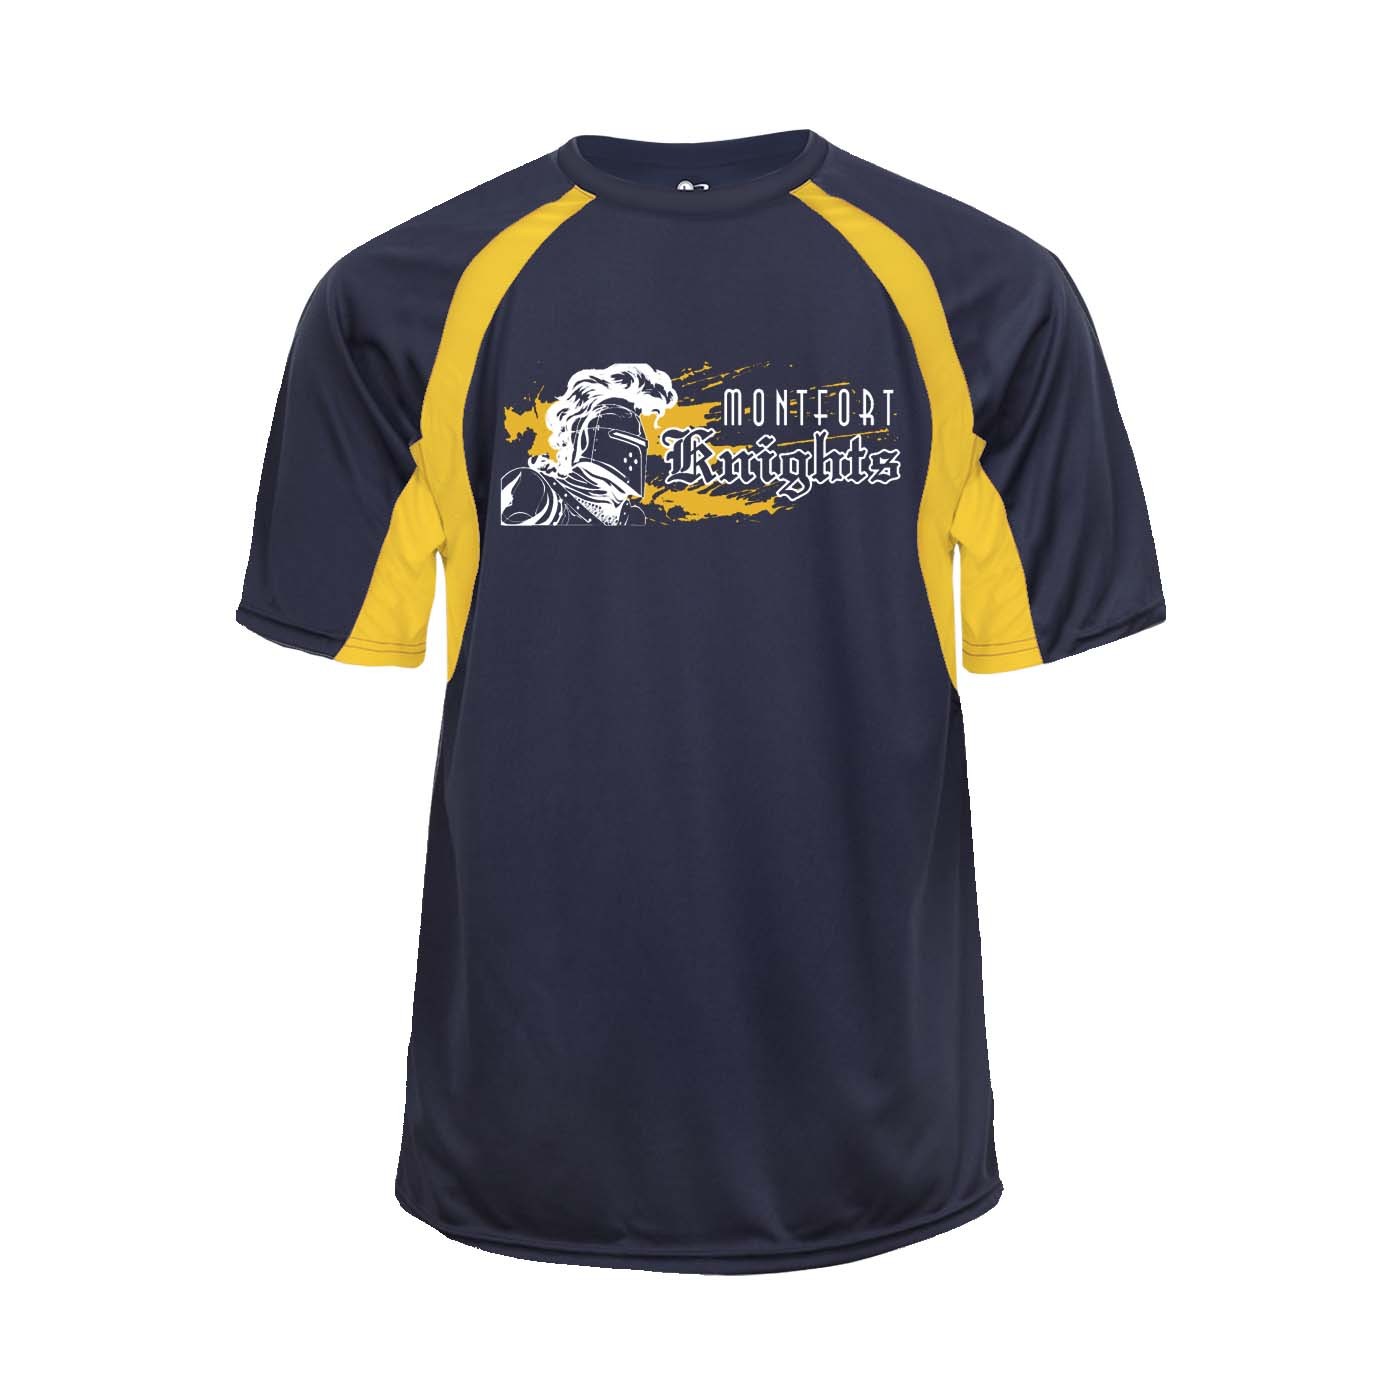 MONTFORT Spirit Hook S/S T-Shirt w/ White Knight Logo - Please Allow 2-3 Weeks for Delivery